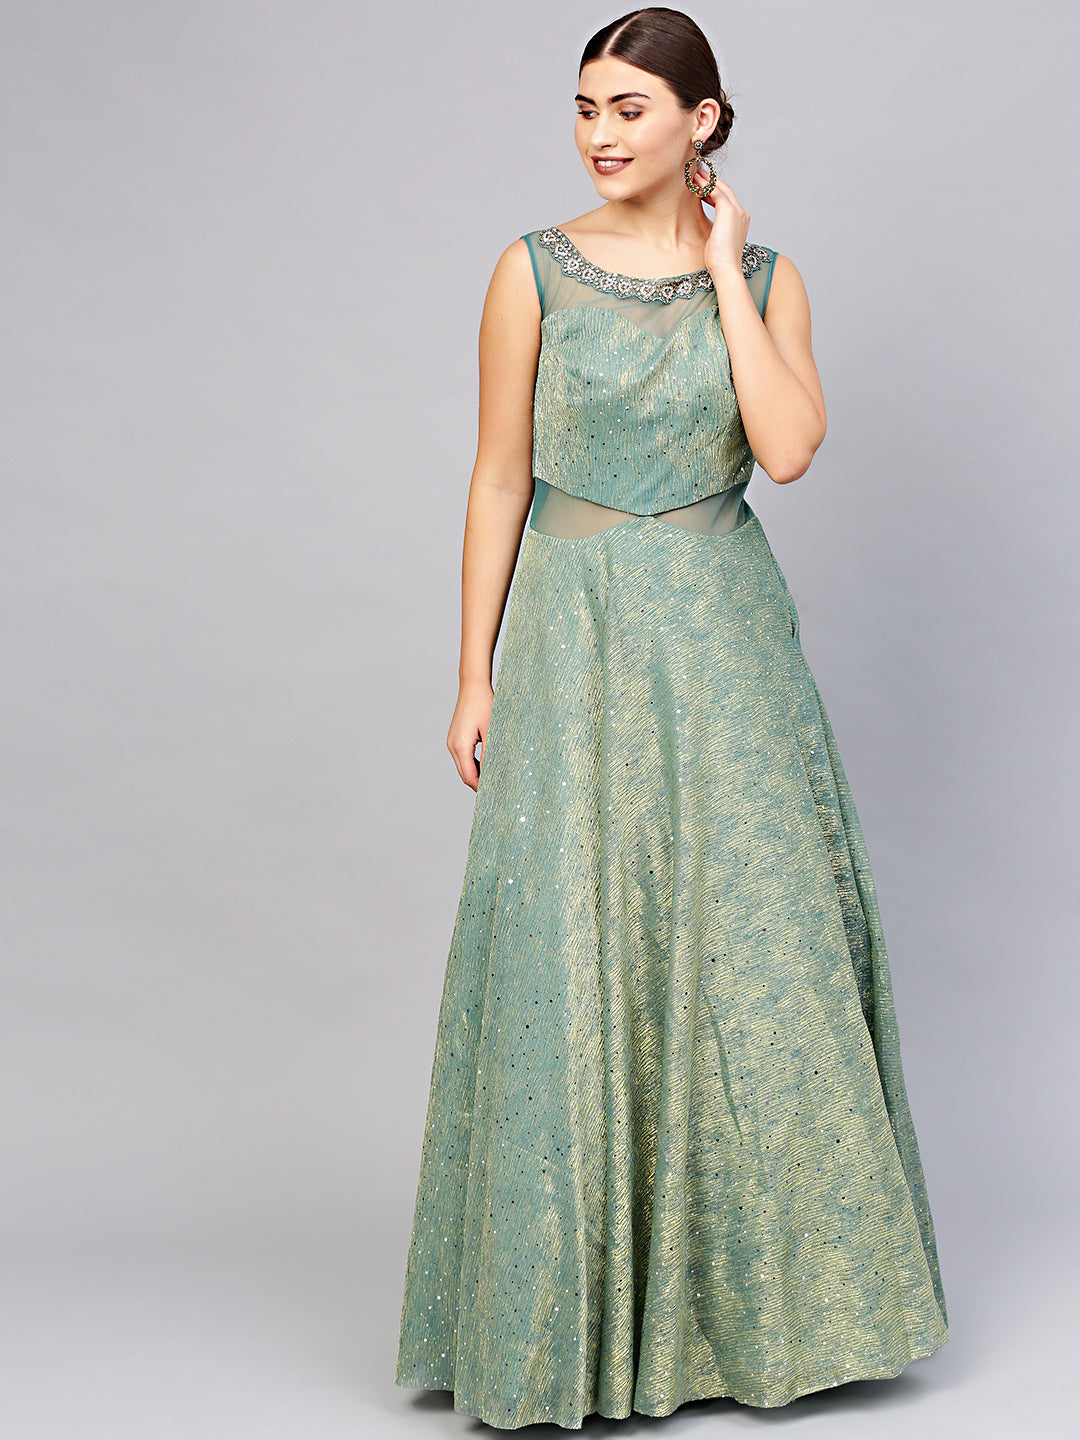 Green tissue silk fabric gown | Gowns for girls, Kids gown, Kids frocks  design